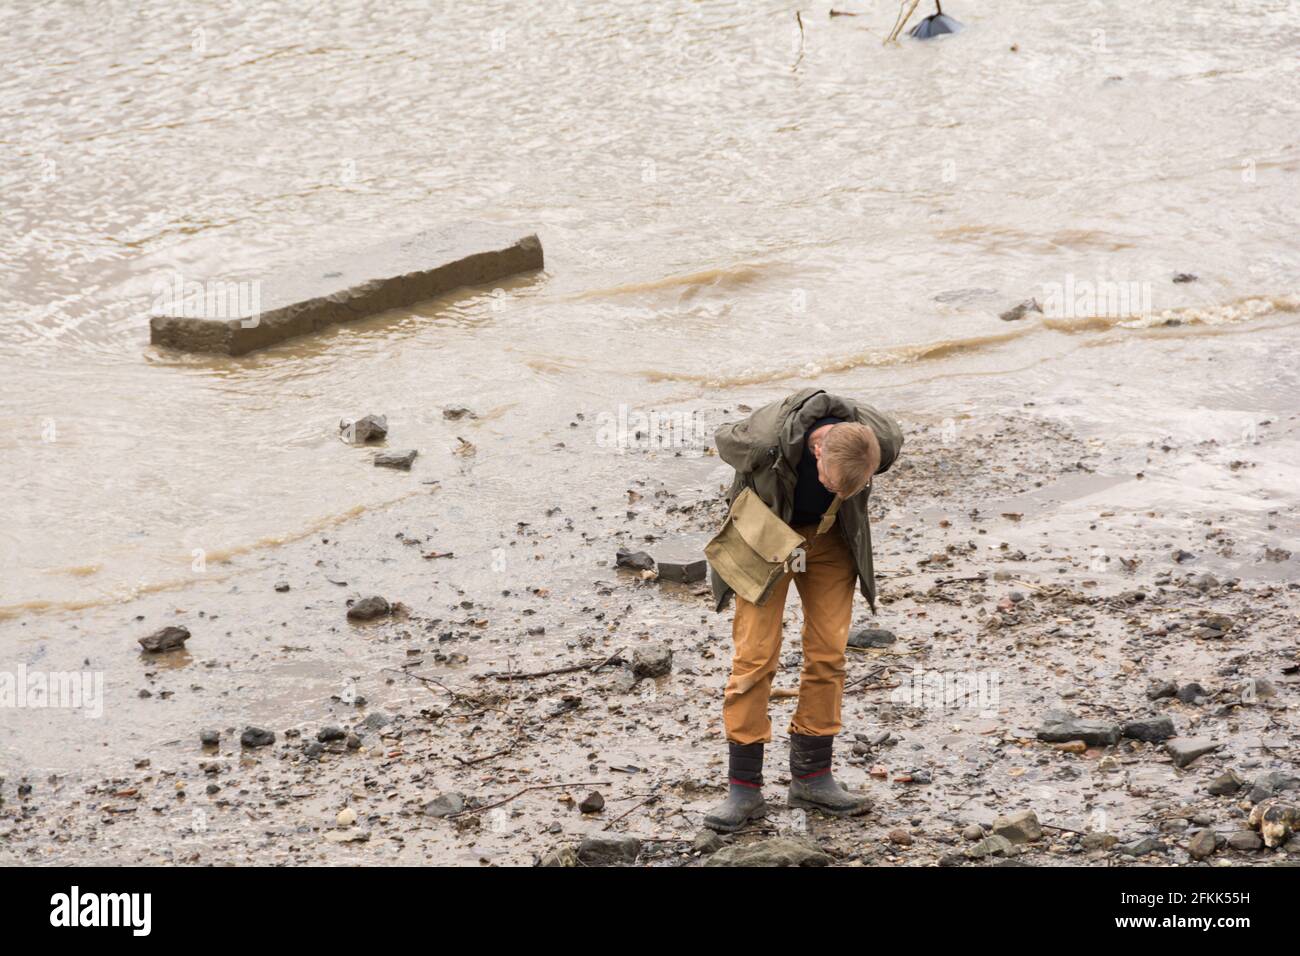 A man mudlarking on the River Thames in central London, UK. Stock Photo